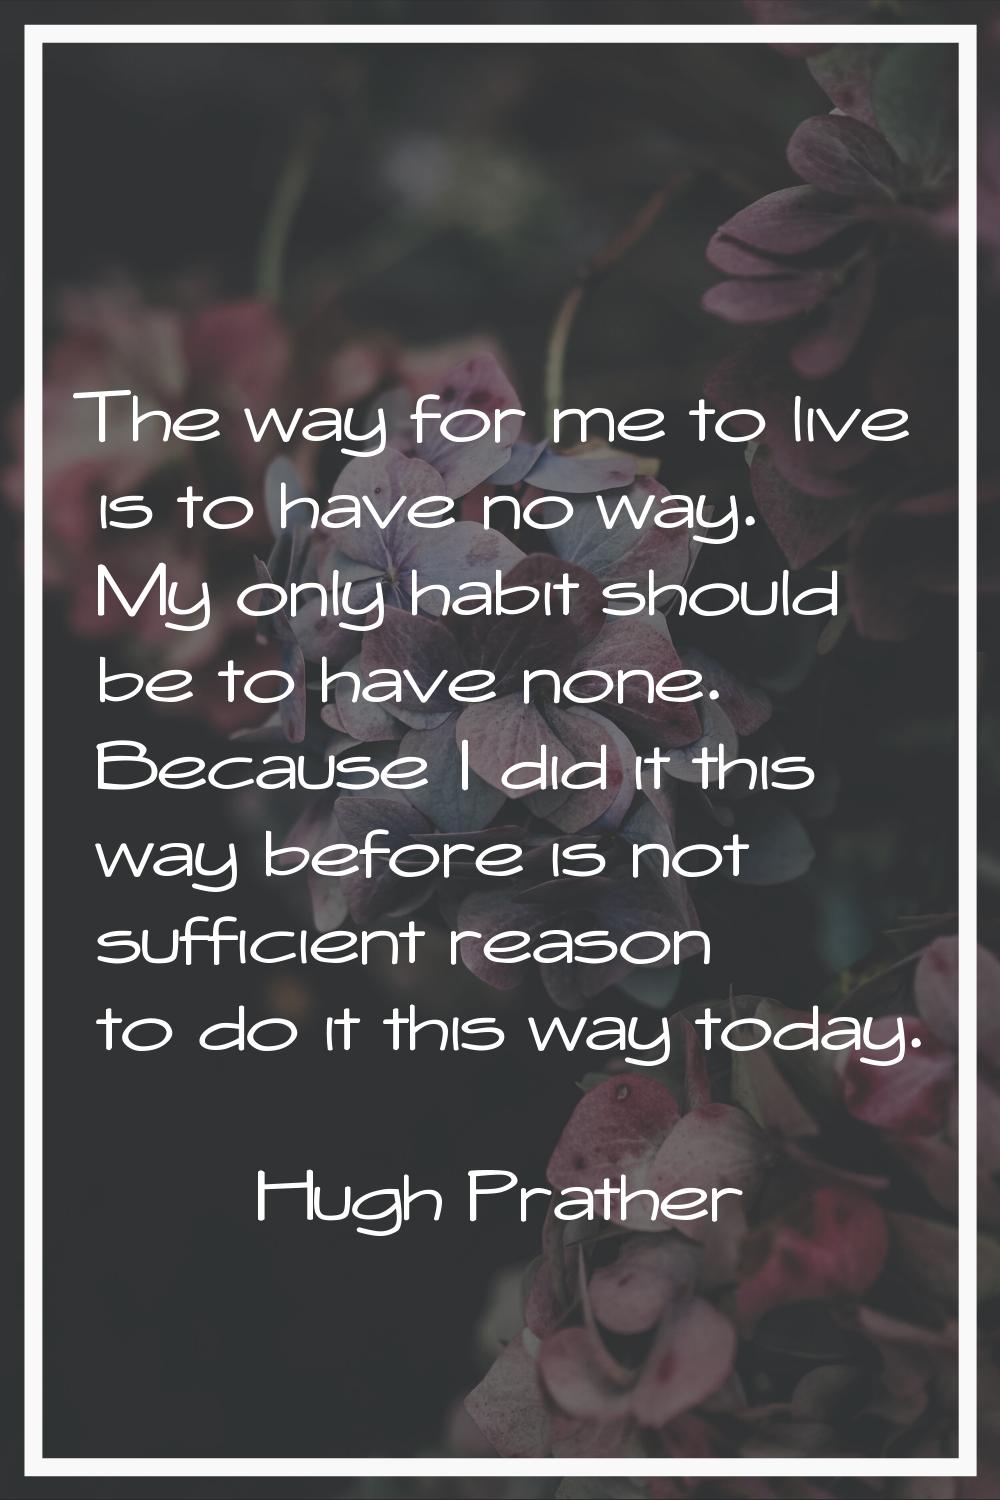 The way for me to live is to have no way. My only habit should be to have none. Because I did it th